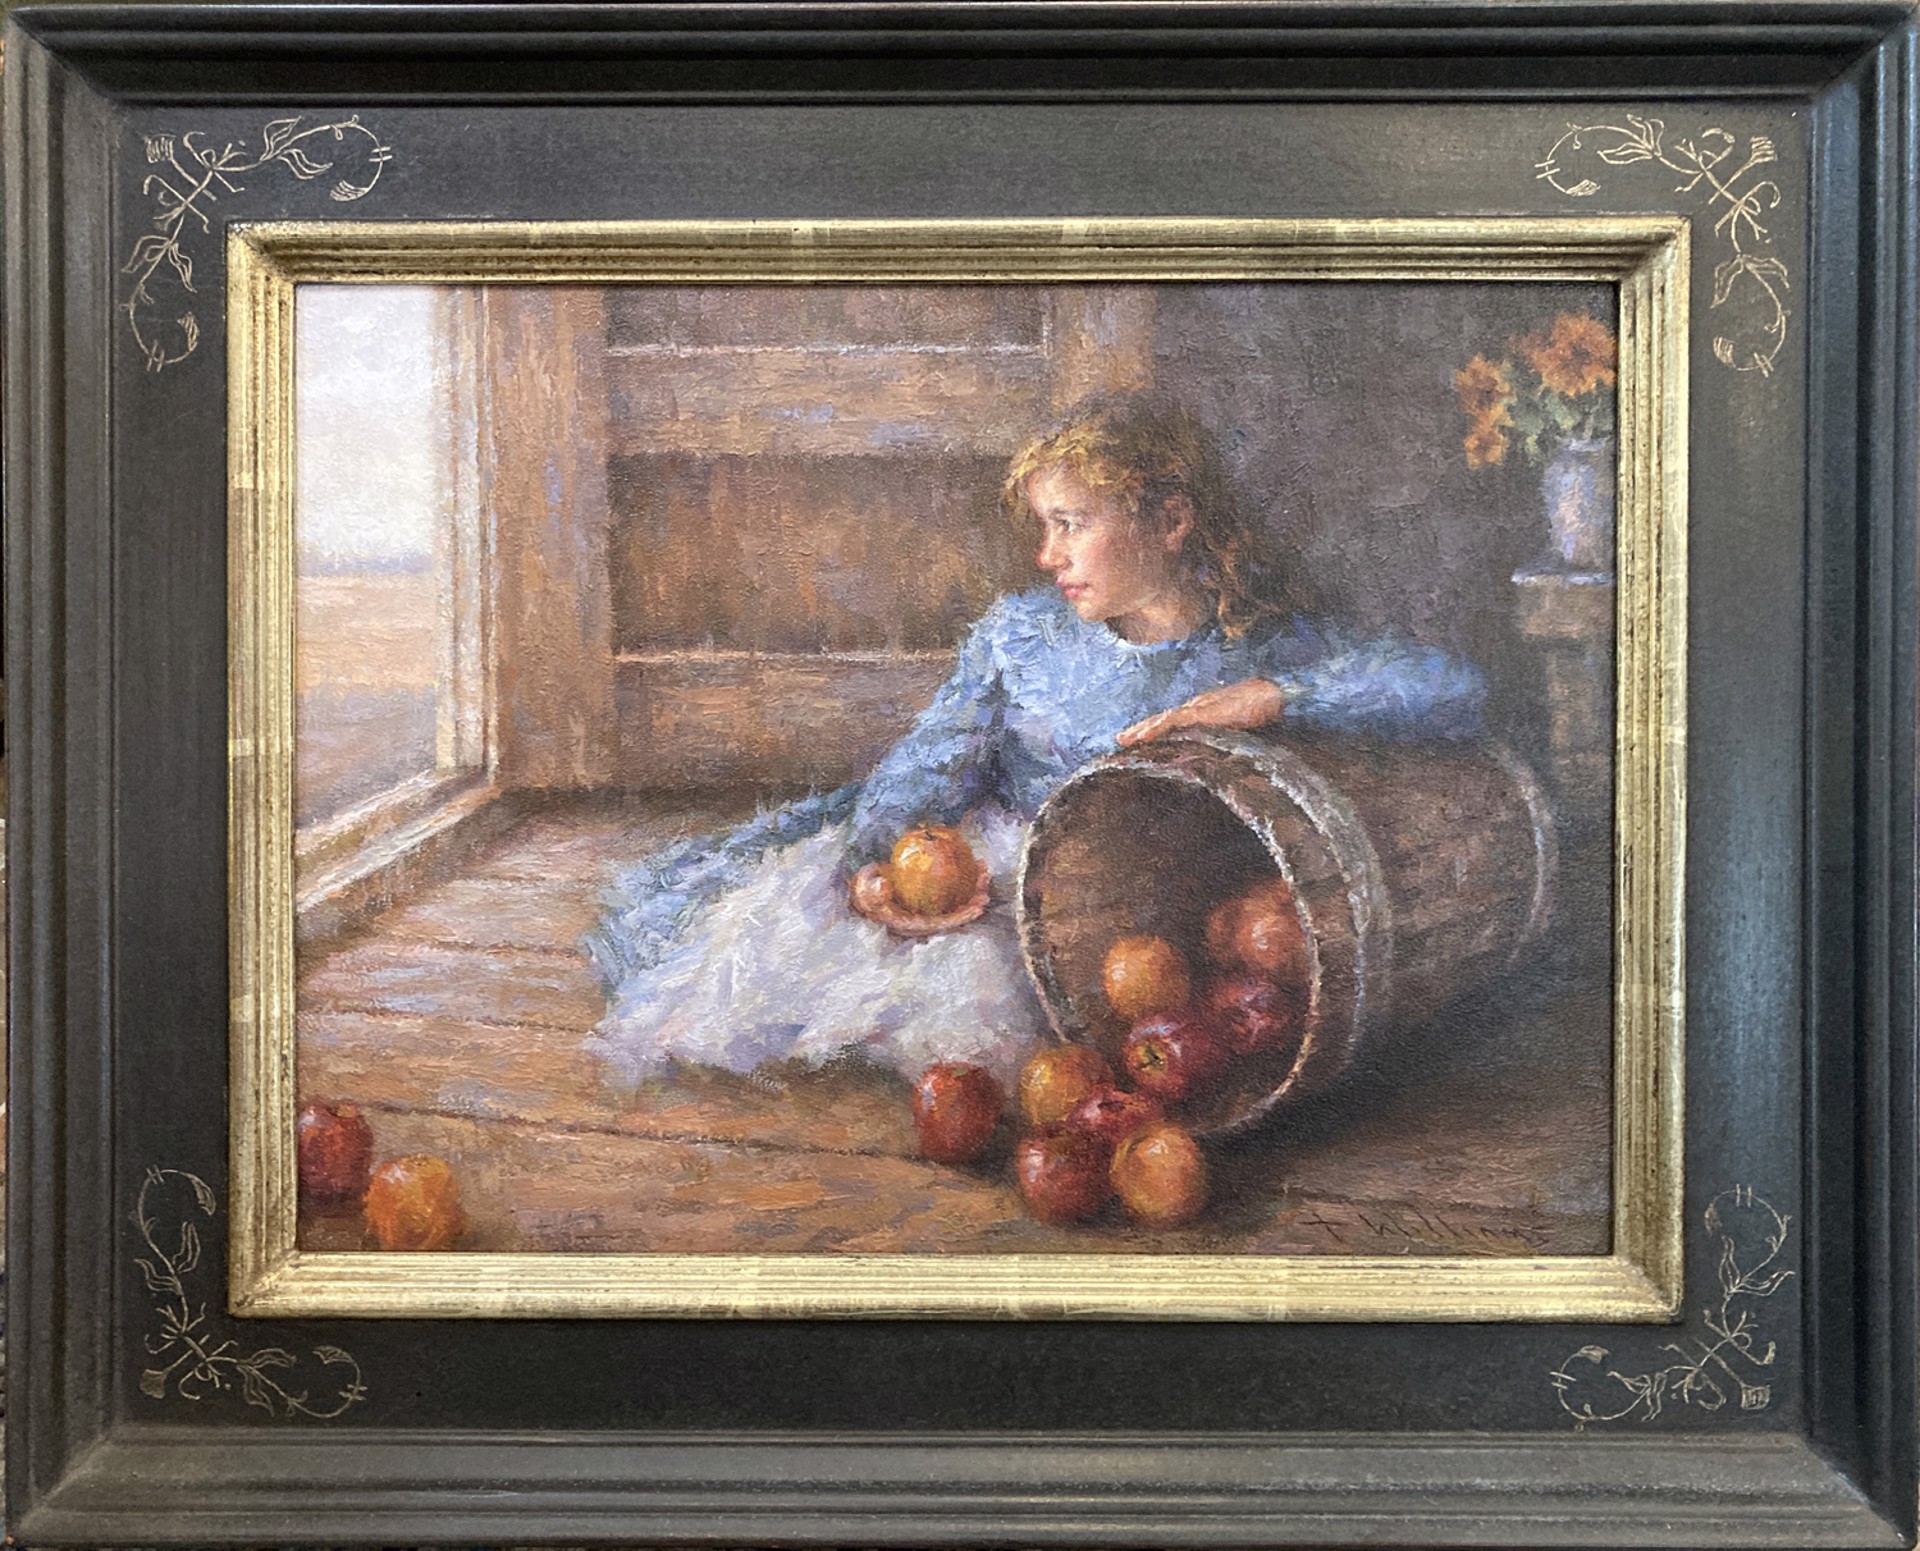 Apples and Annie by Todd A. Williams